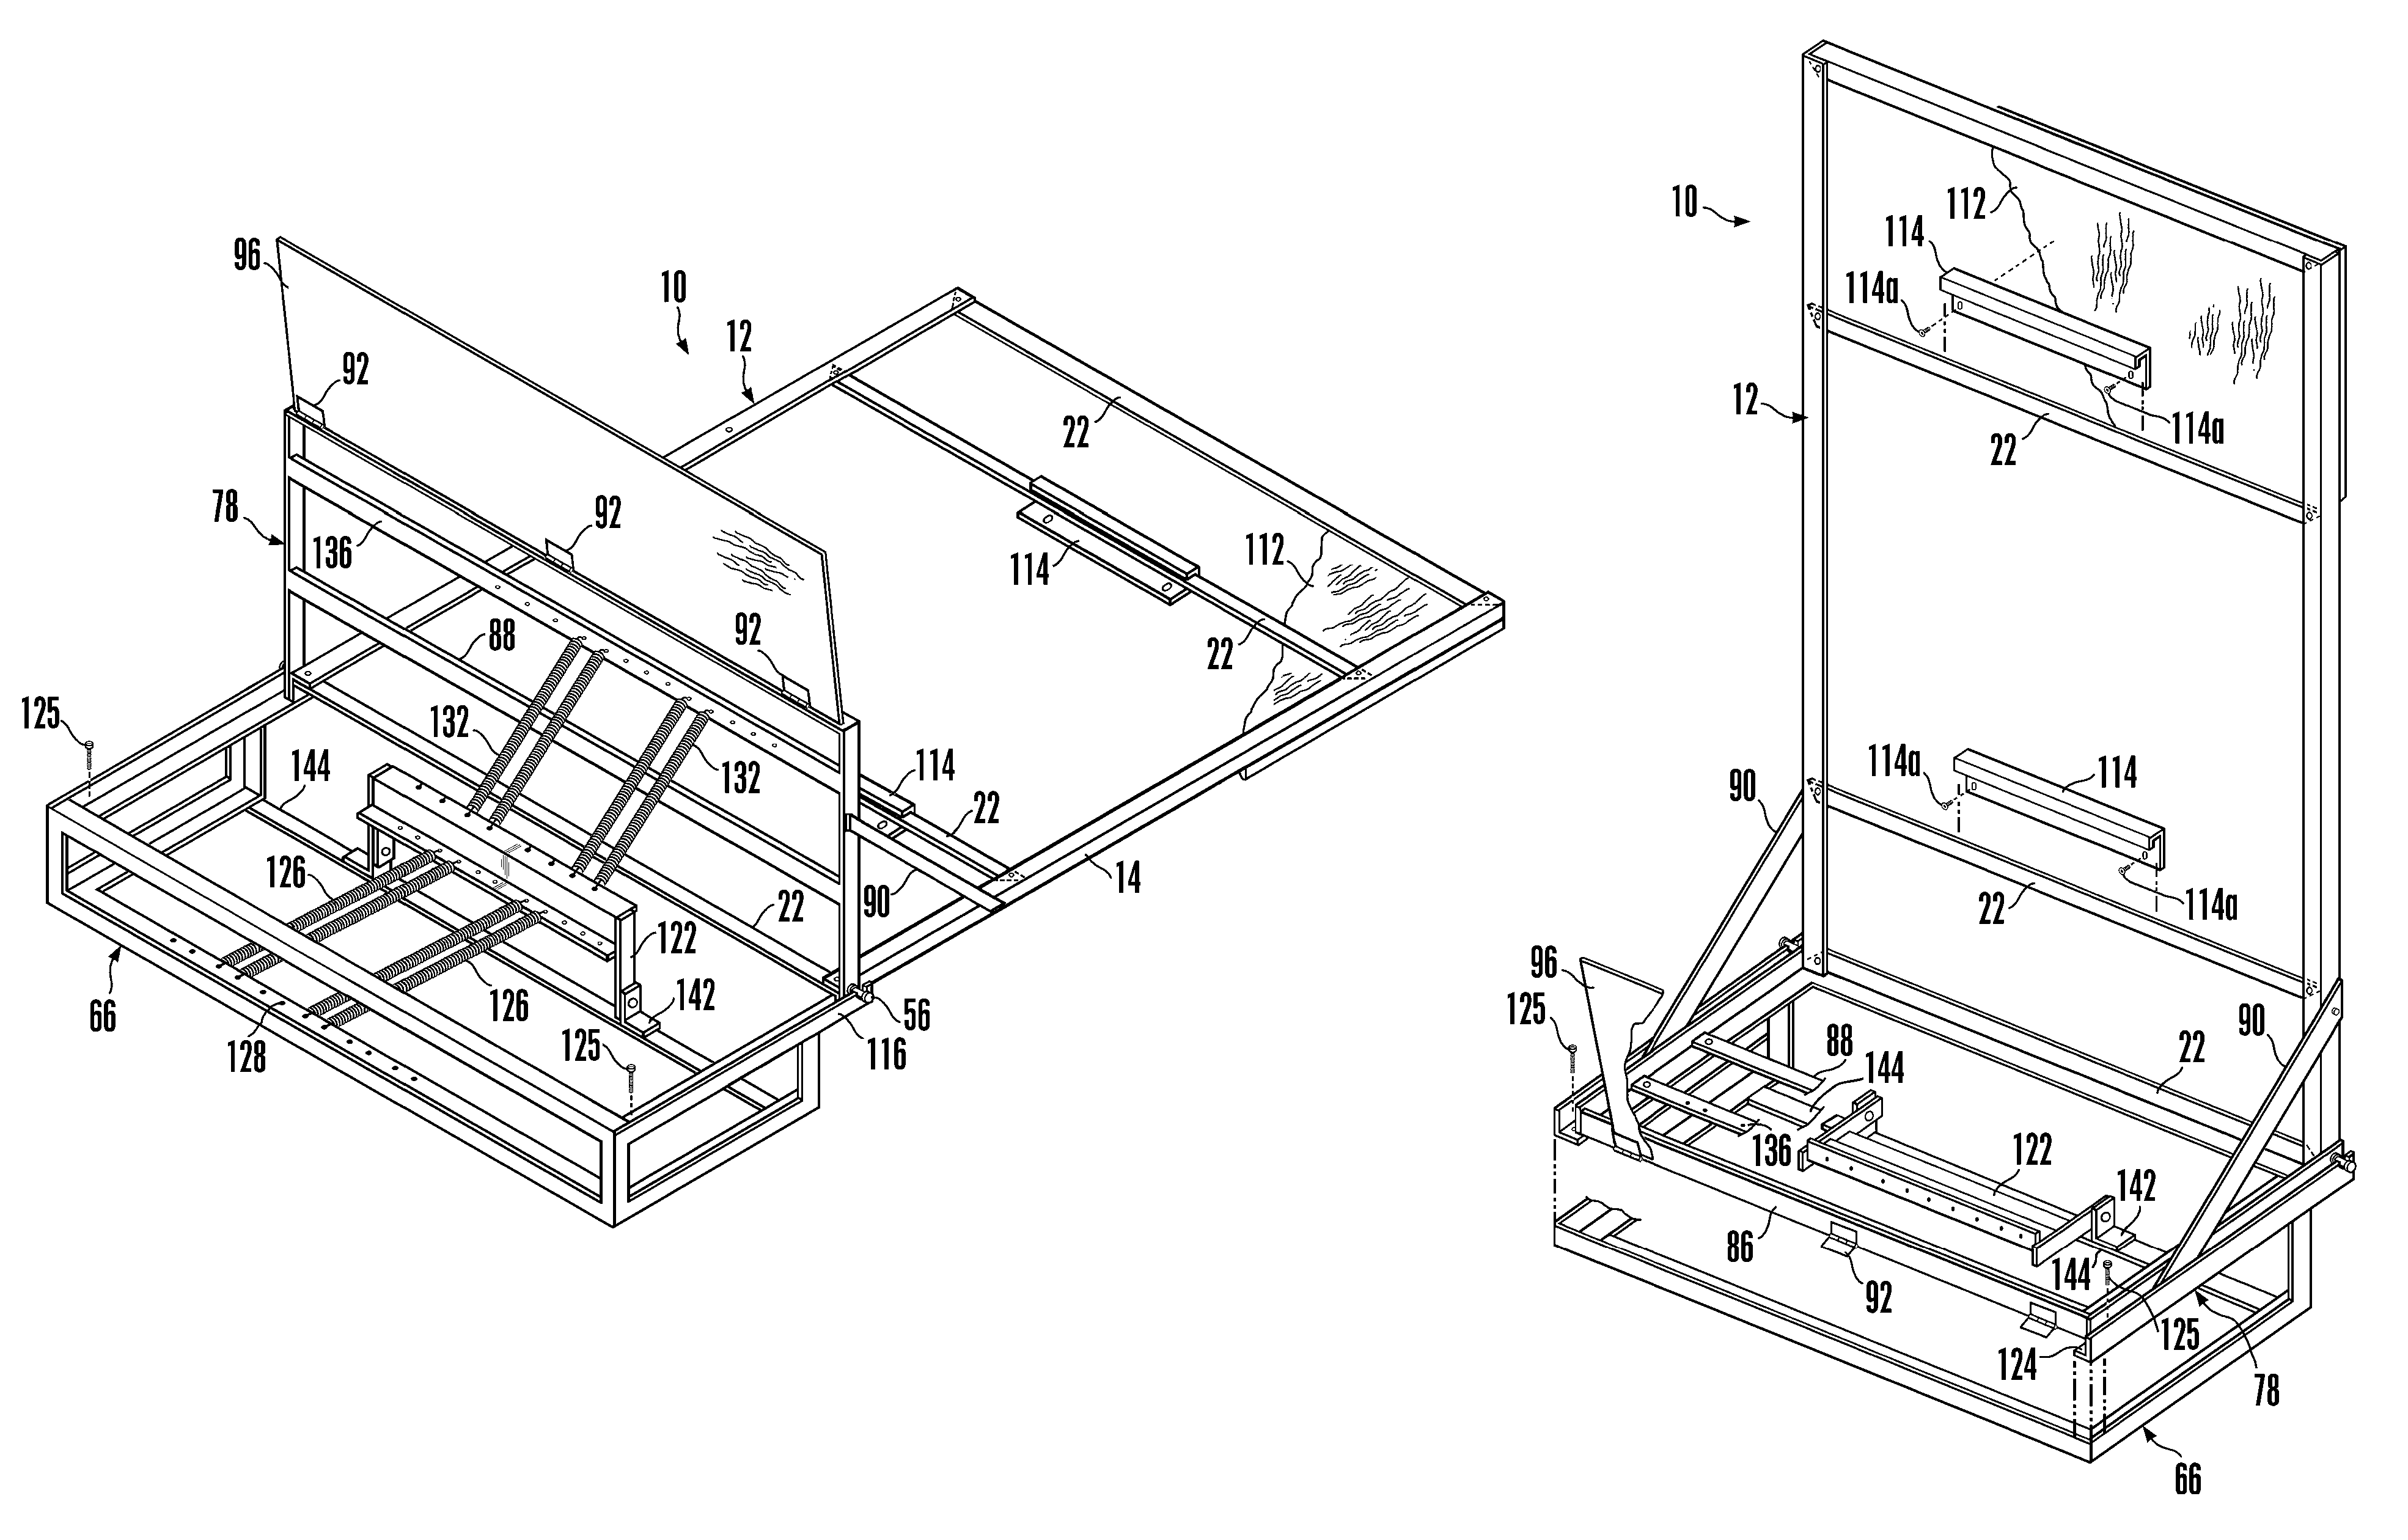 Foldaway bed frames and spring supports